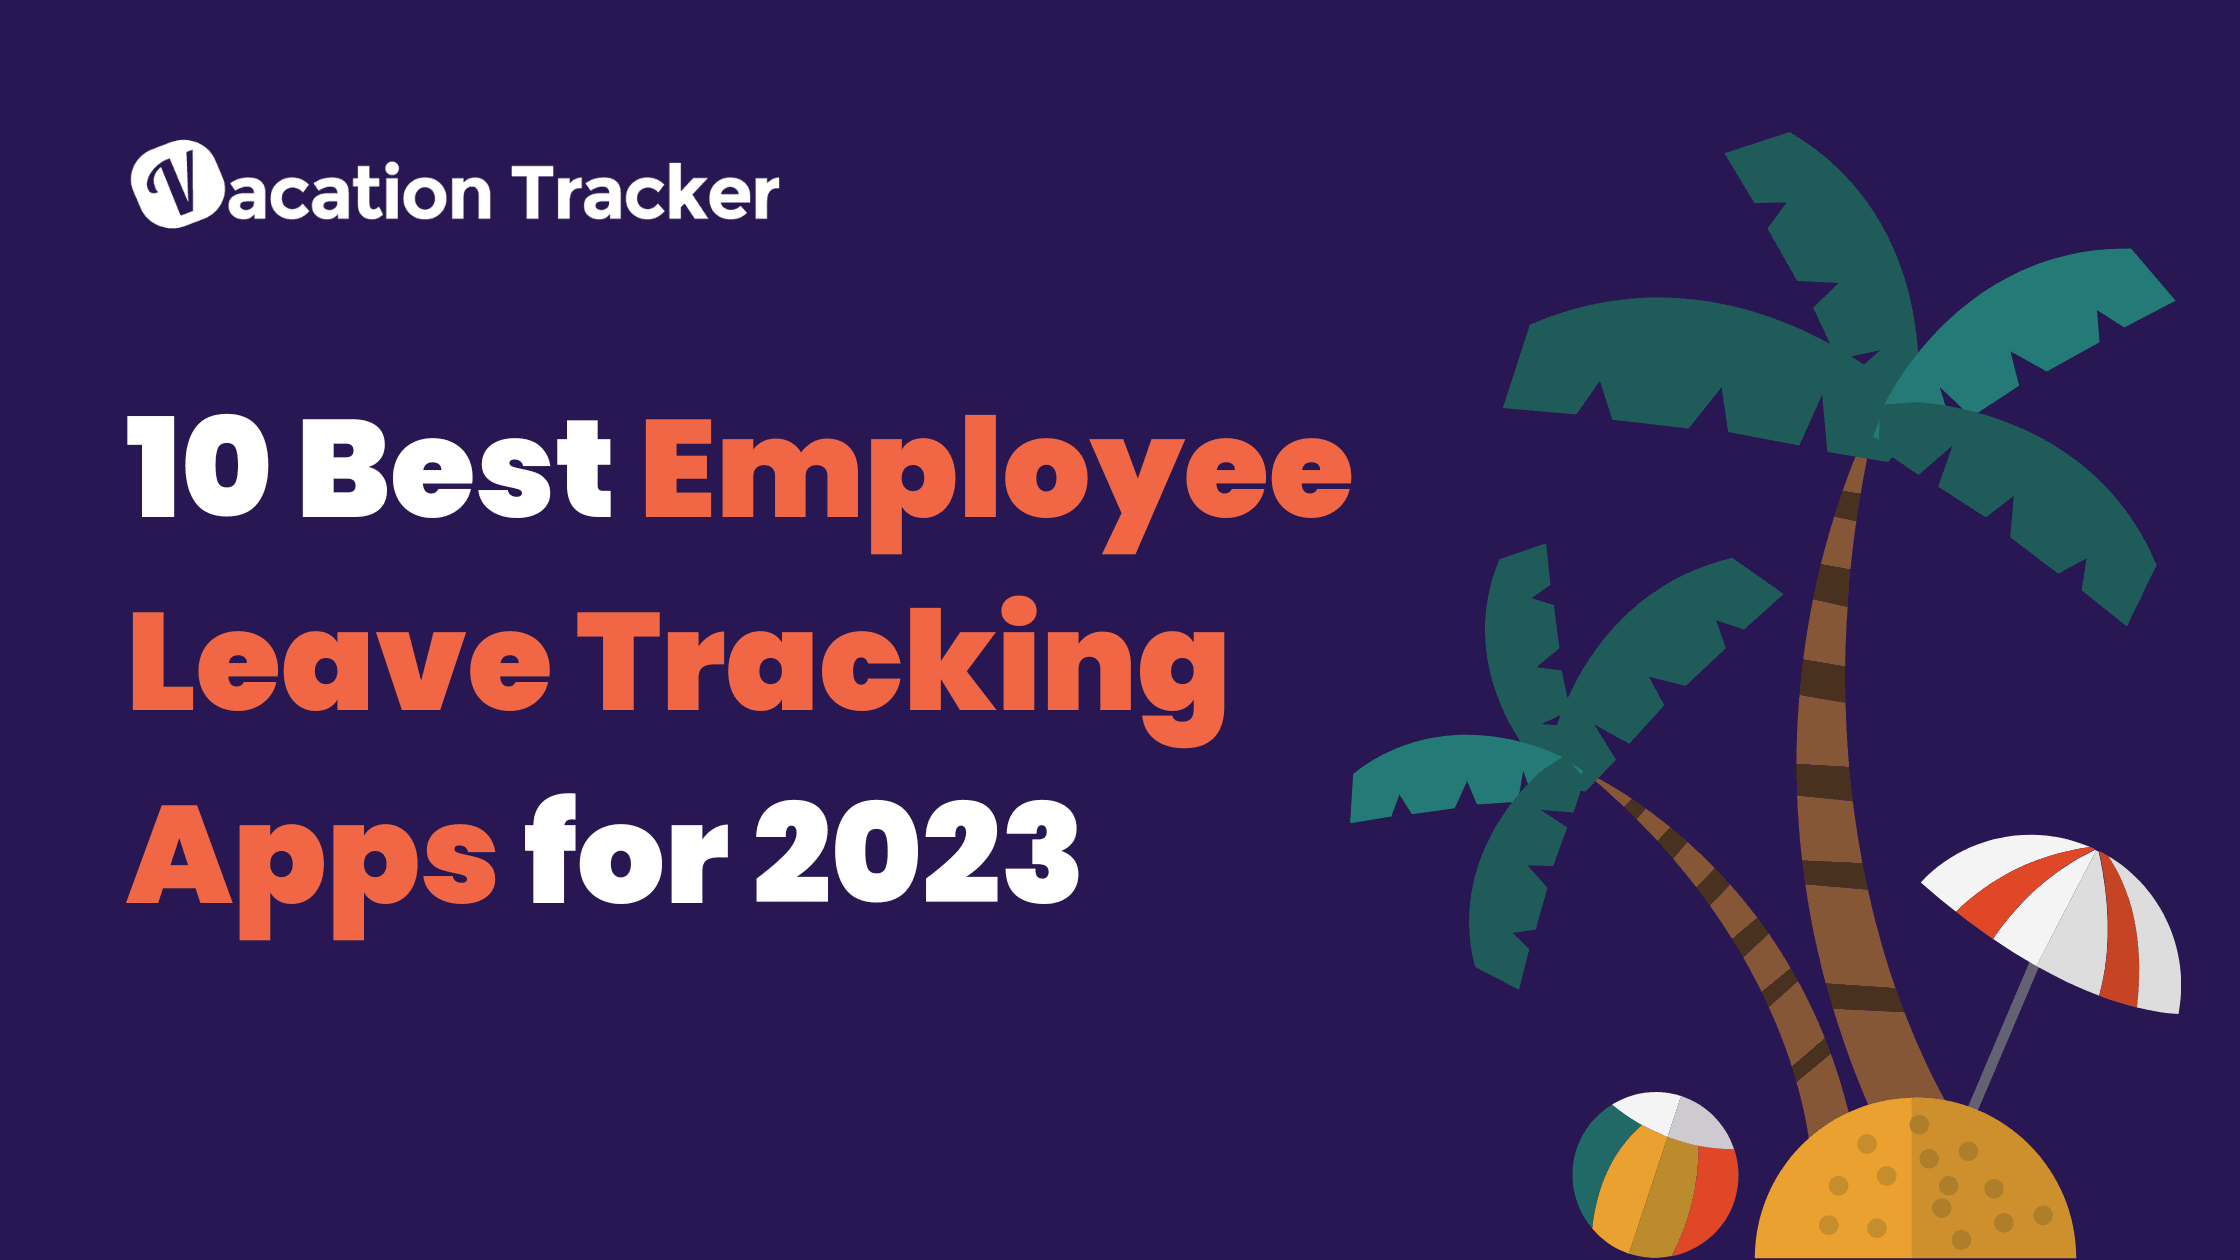 10 Best Employee Leave Tracking Apps for 2023